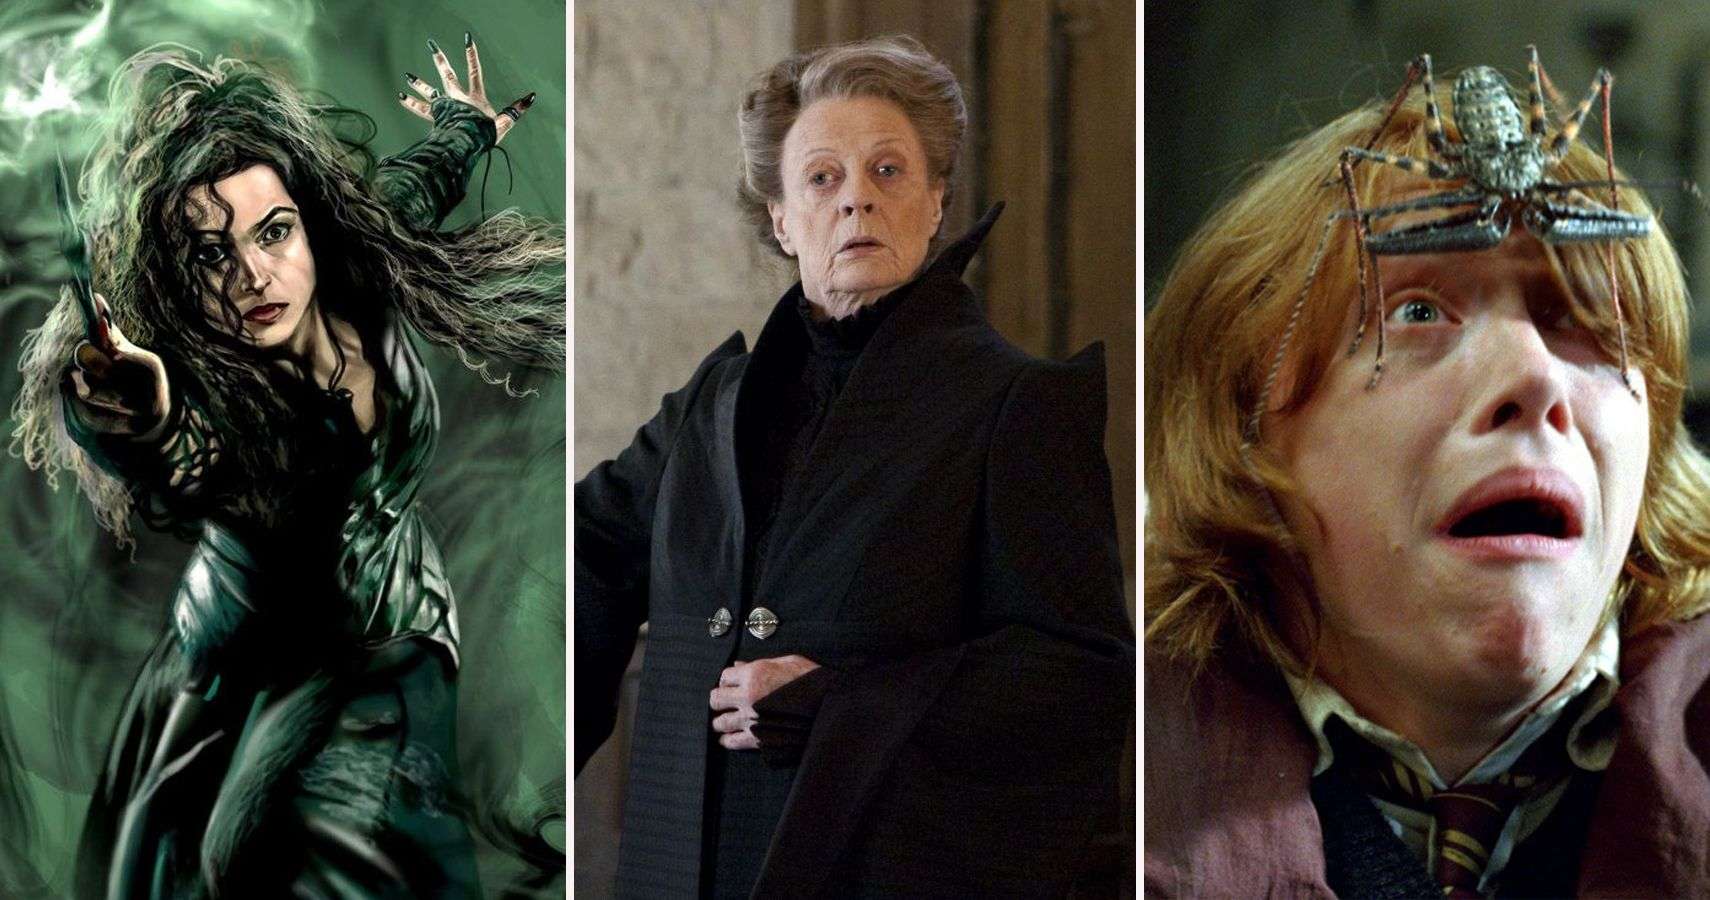 25 Main Harry Potter Wizards From Weakest To Strongest ...